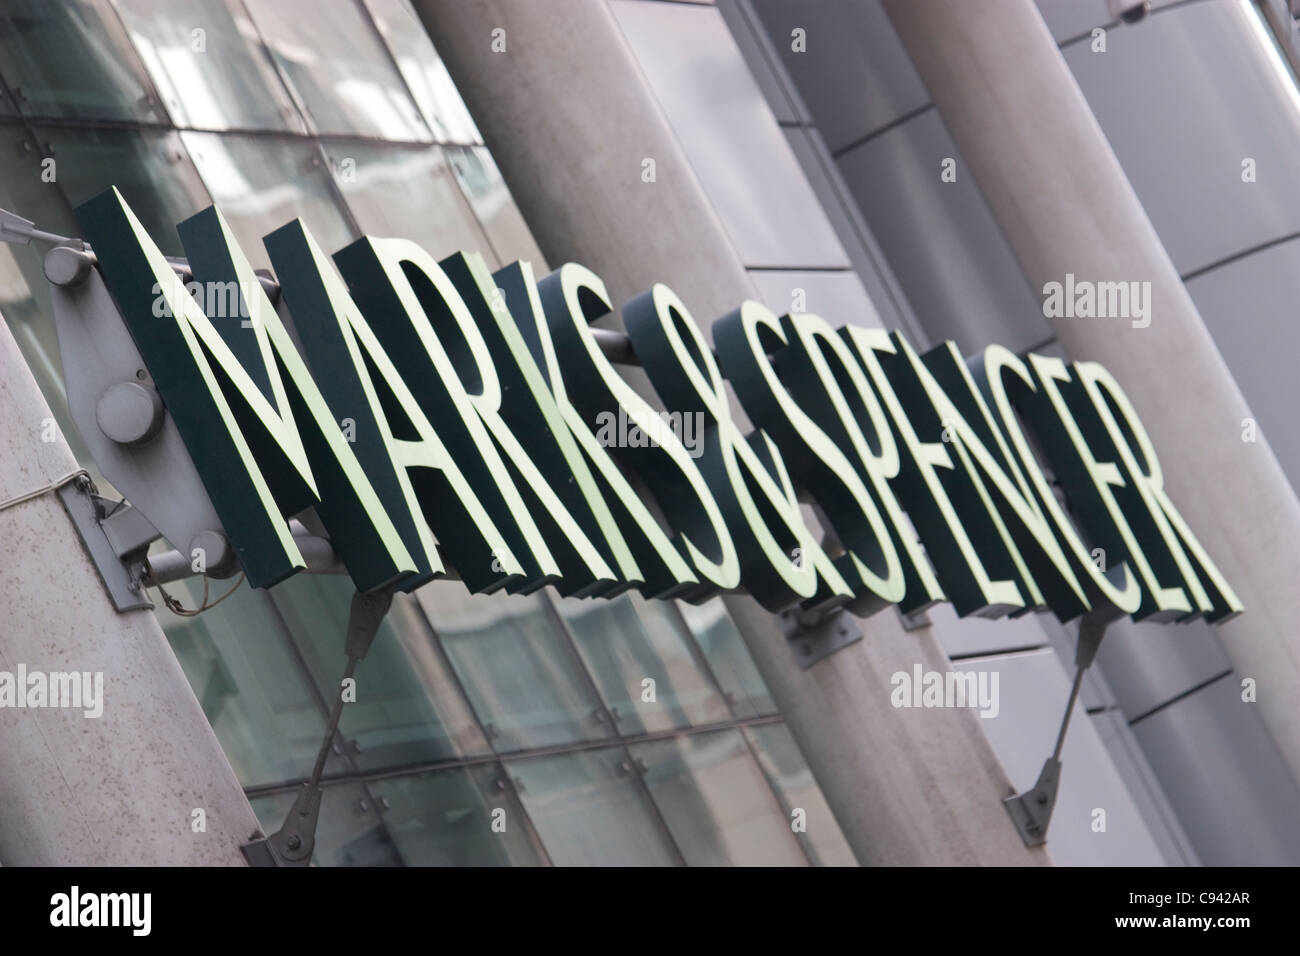 marks and spencer sign outside shop Stock Photo